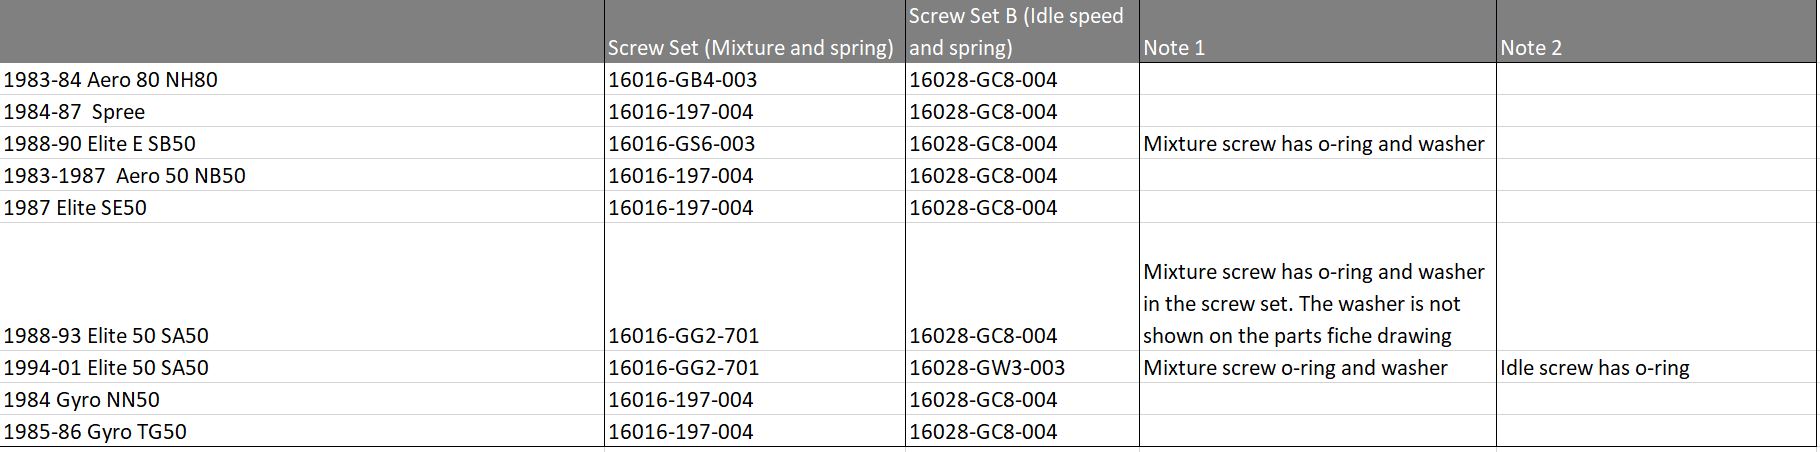 Carb_Mixture_and_Idle_Screw_Table.JPG